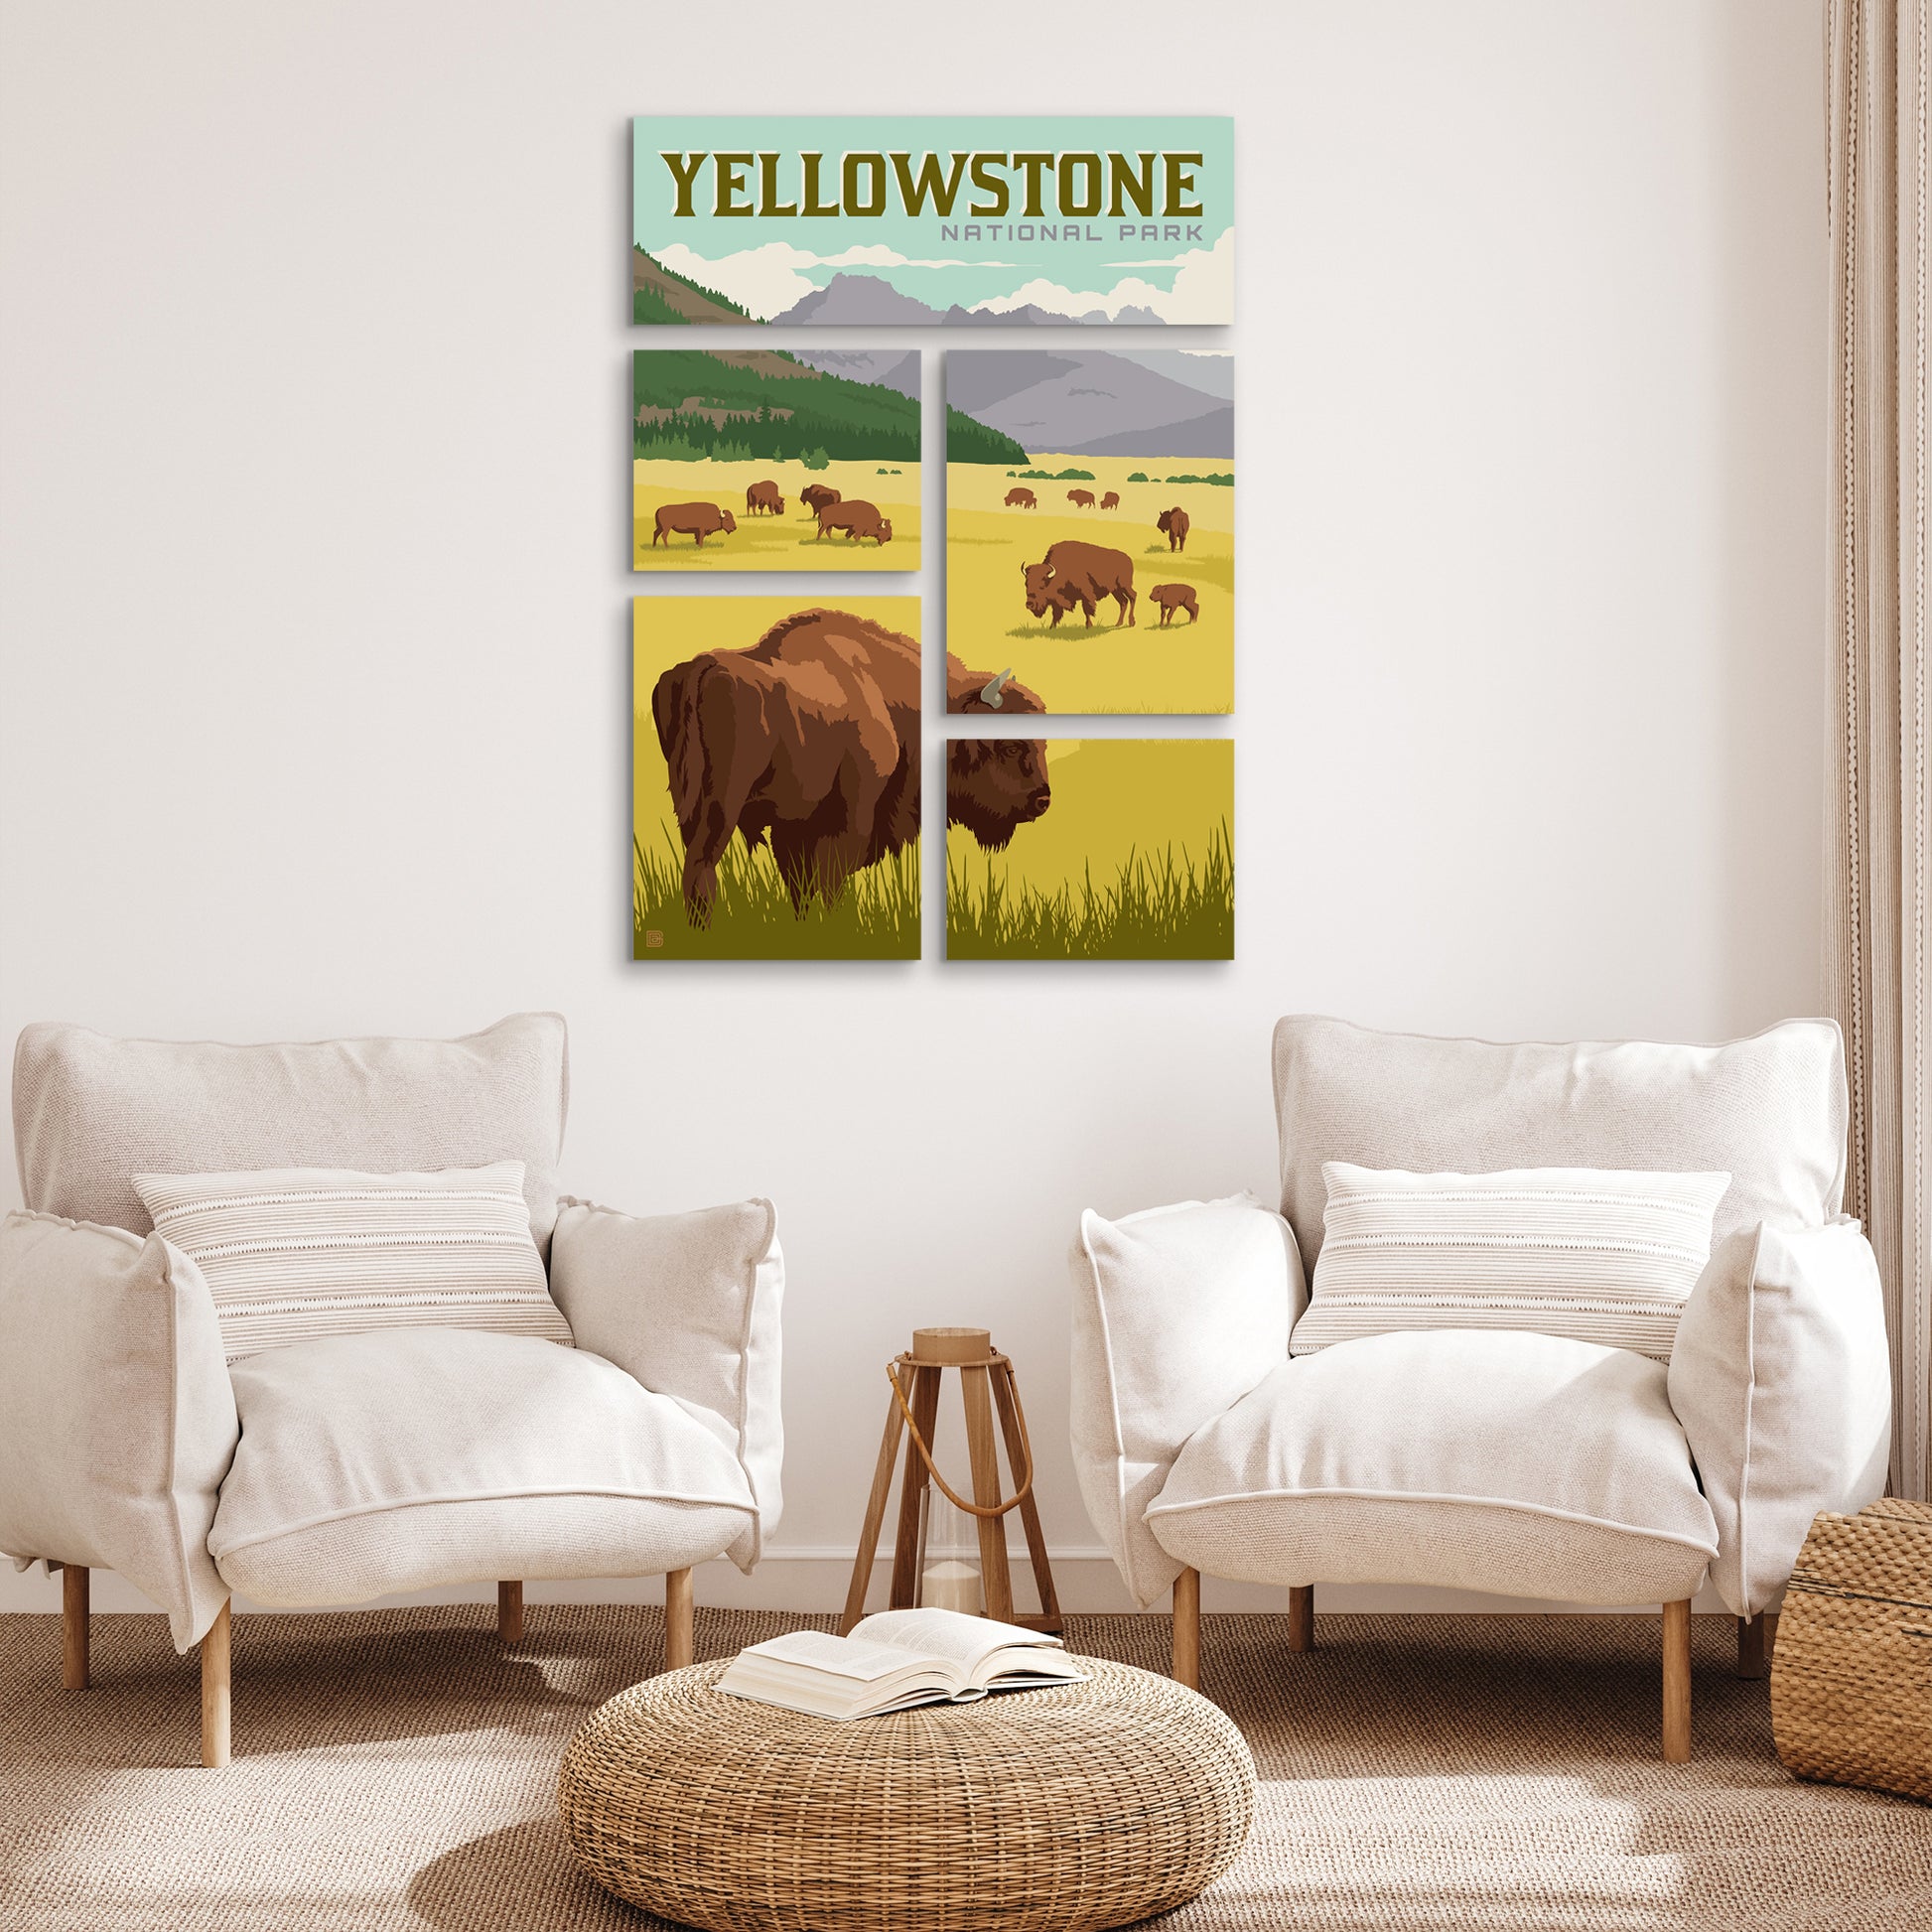 How To Decorate Your House Like Yellowstone